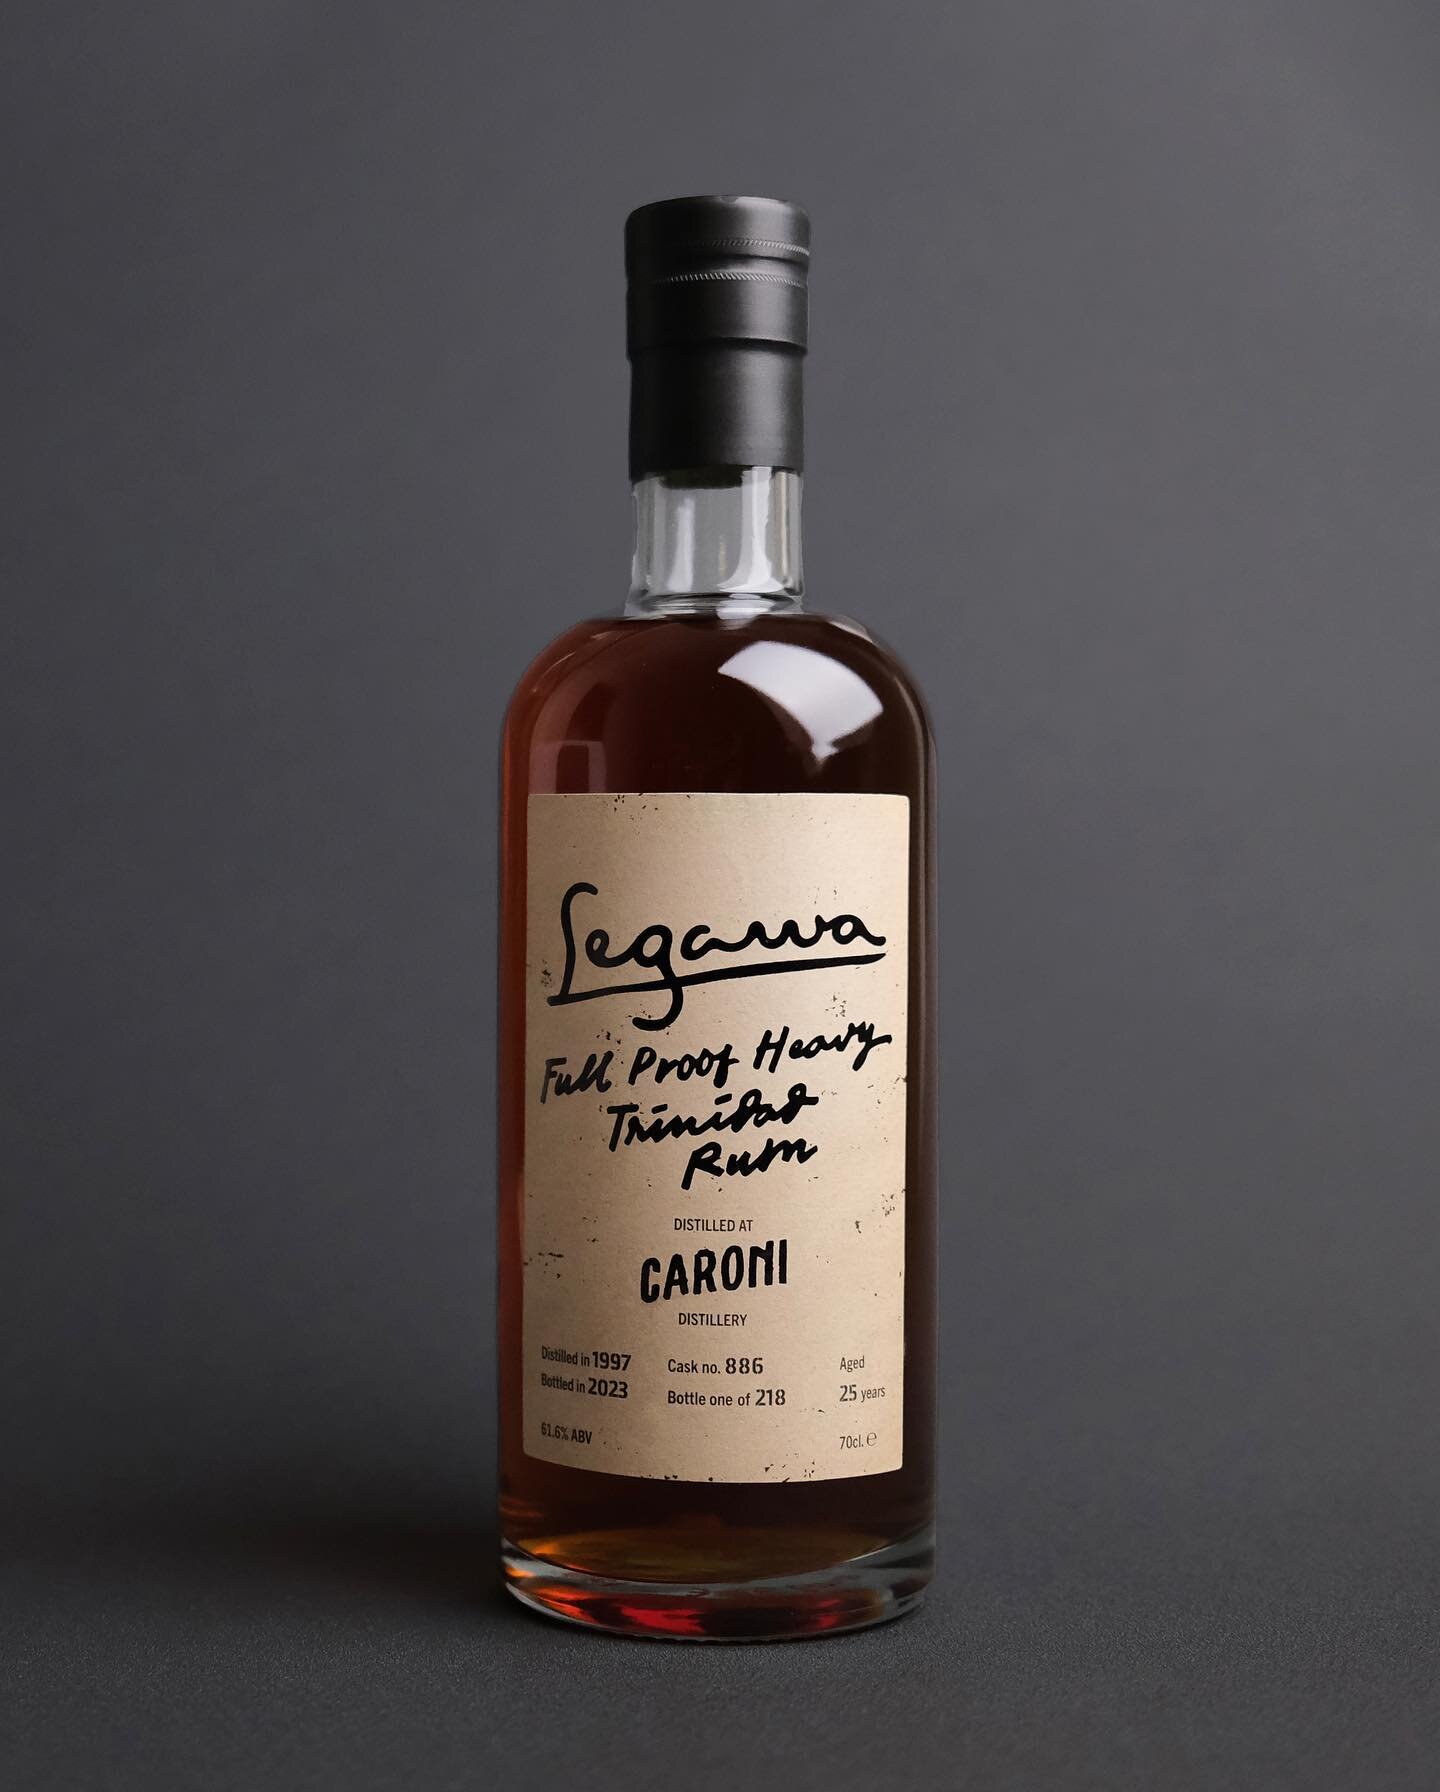 It was a breath of fresh air when a passionate client came to us and asked us to create branding and label design for his limited private bottles of his Caroni distilled rum. He wanted something more personal, handmade and organic rather than creatin